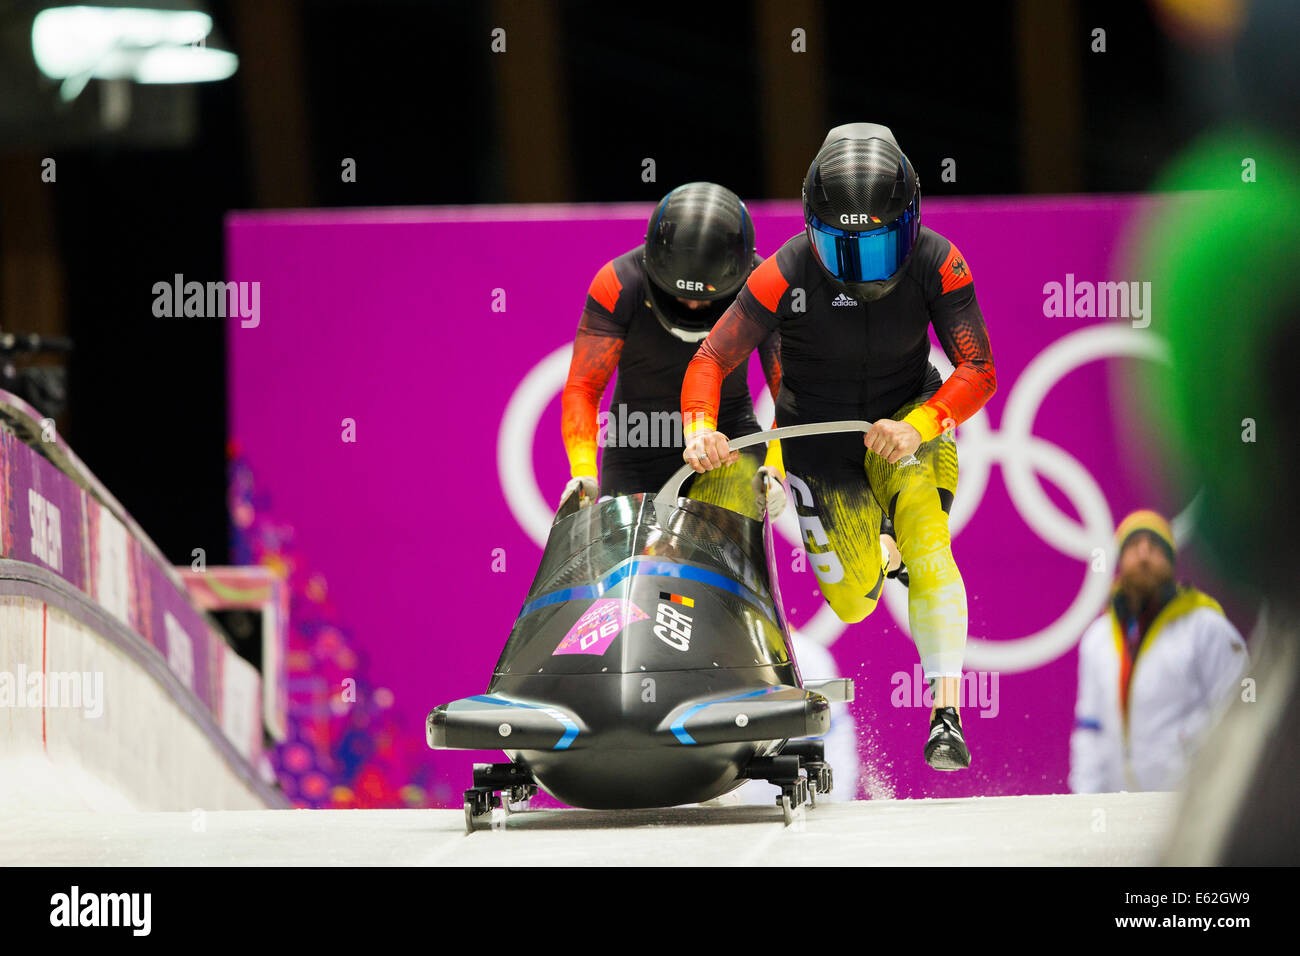 Anja Schneiderheinze and Stephanie Schneider GER-3 competing in the Women's Bobsleigh at the Olympic Winter Games, Sochi 2014 Stock Photo